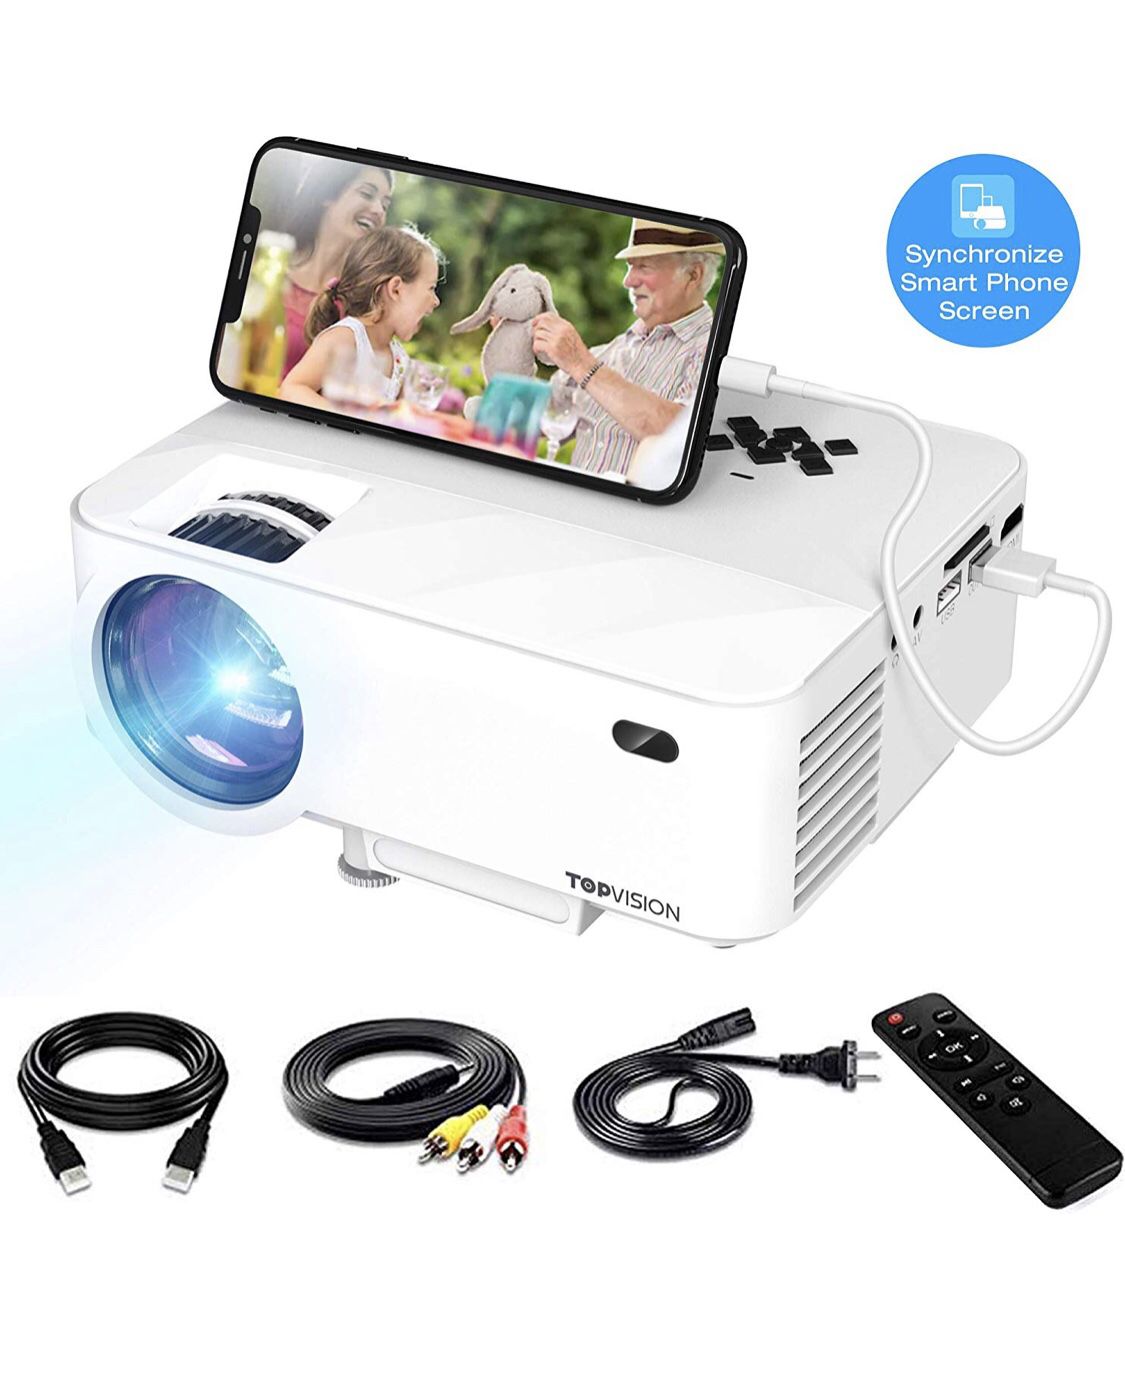 Projector, Upgraded DBPOWER Mini Video Projector, Multimedia Home Theater Video Projector Supporting 1080p, HDMI, USB, VGA, AV for Home Cinema, TVs,